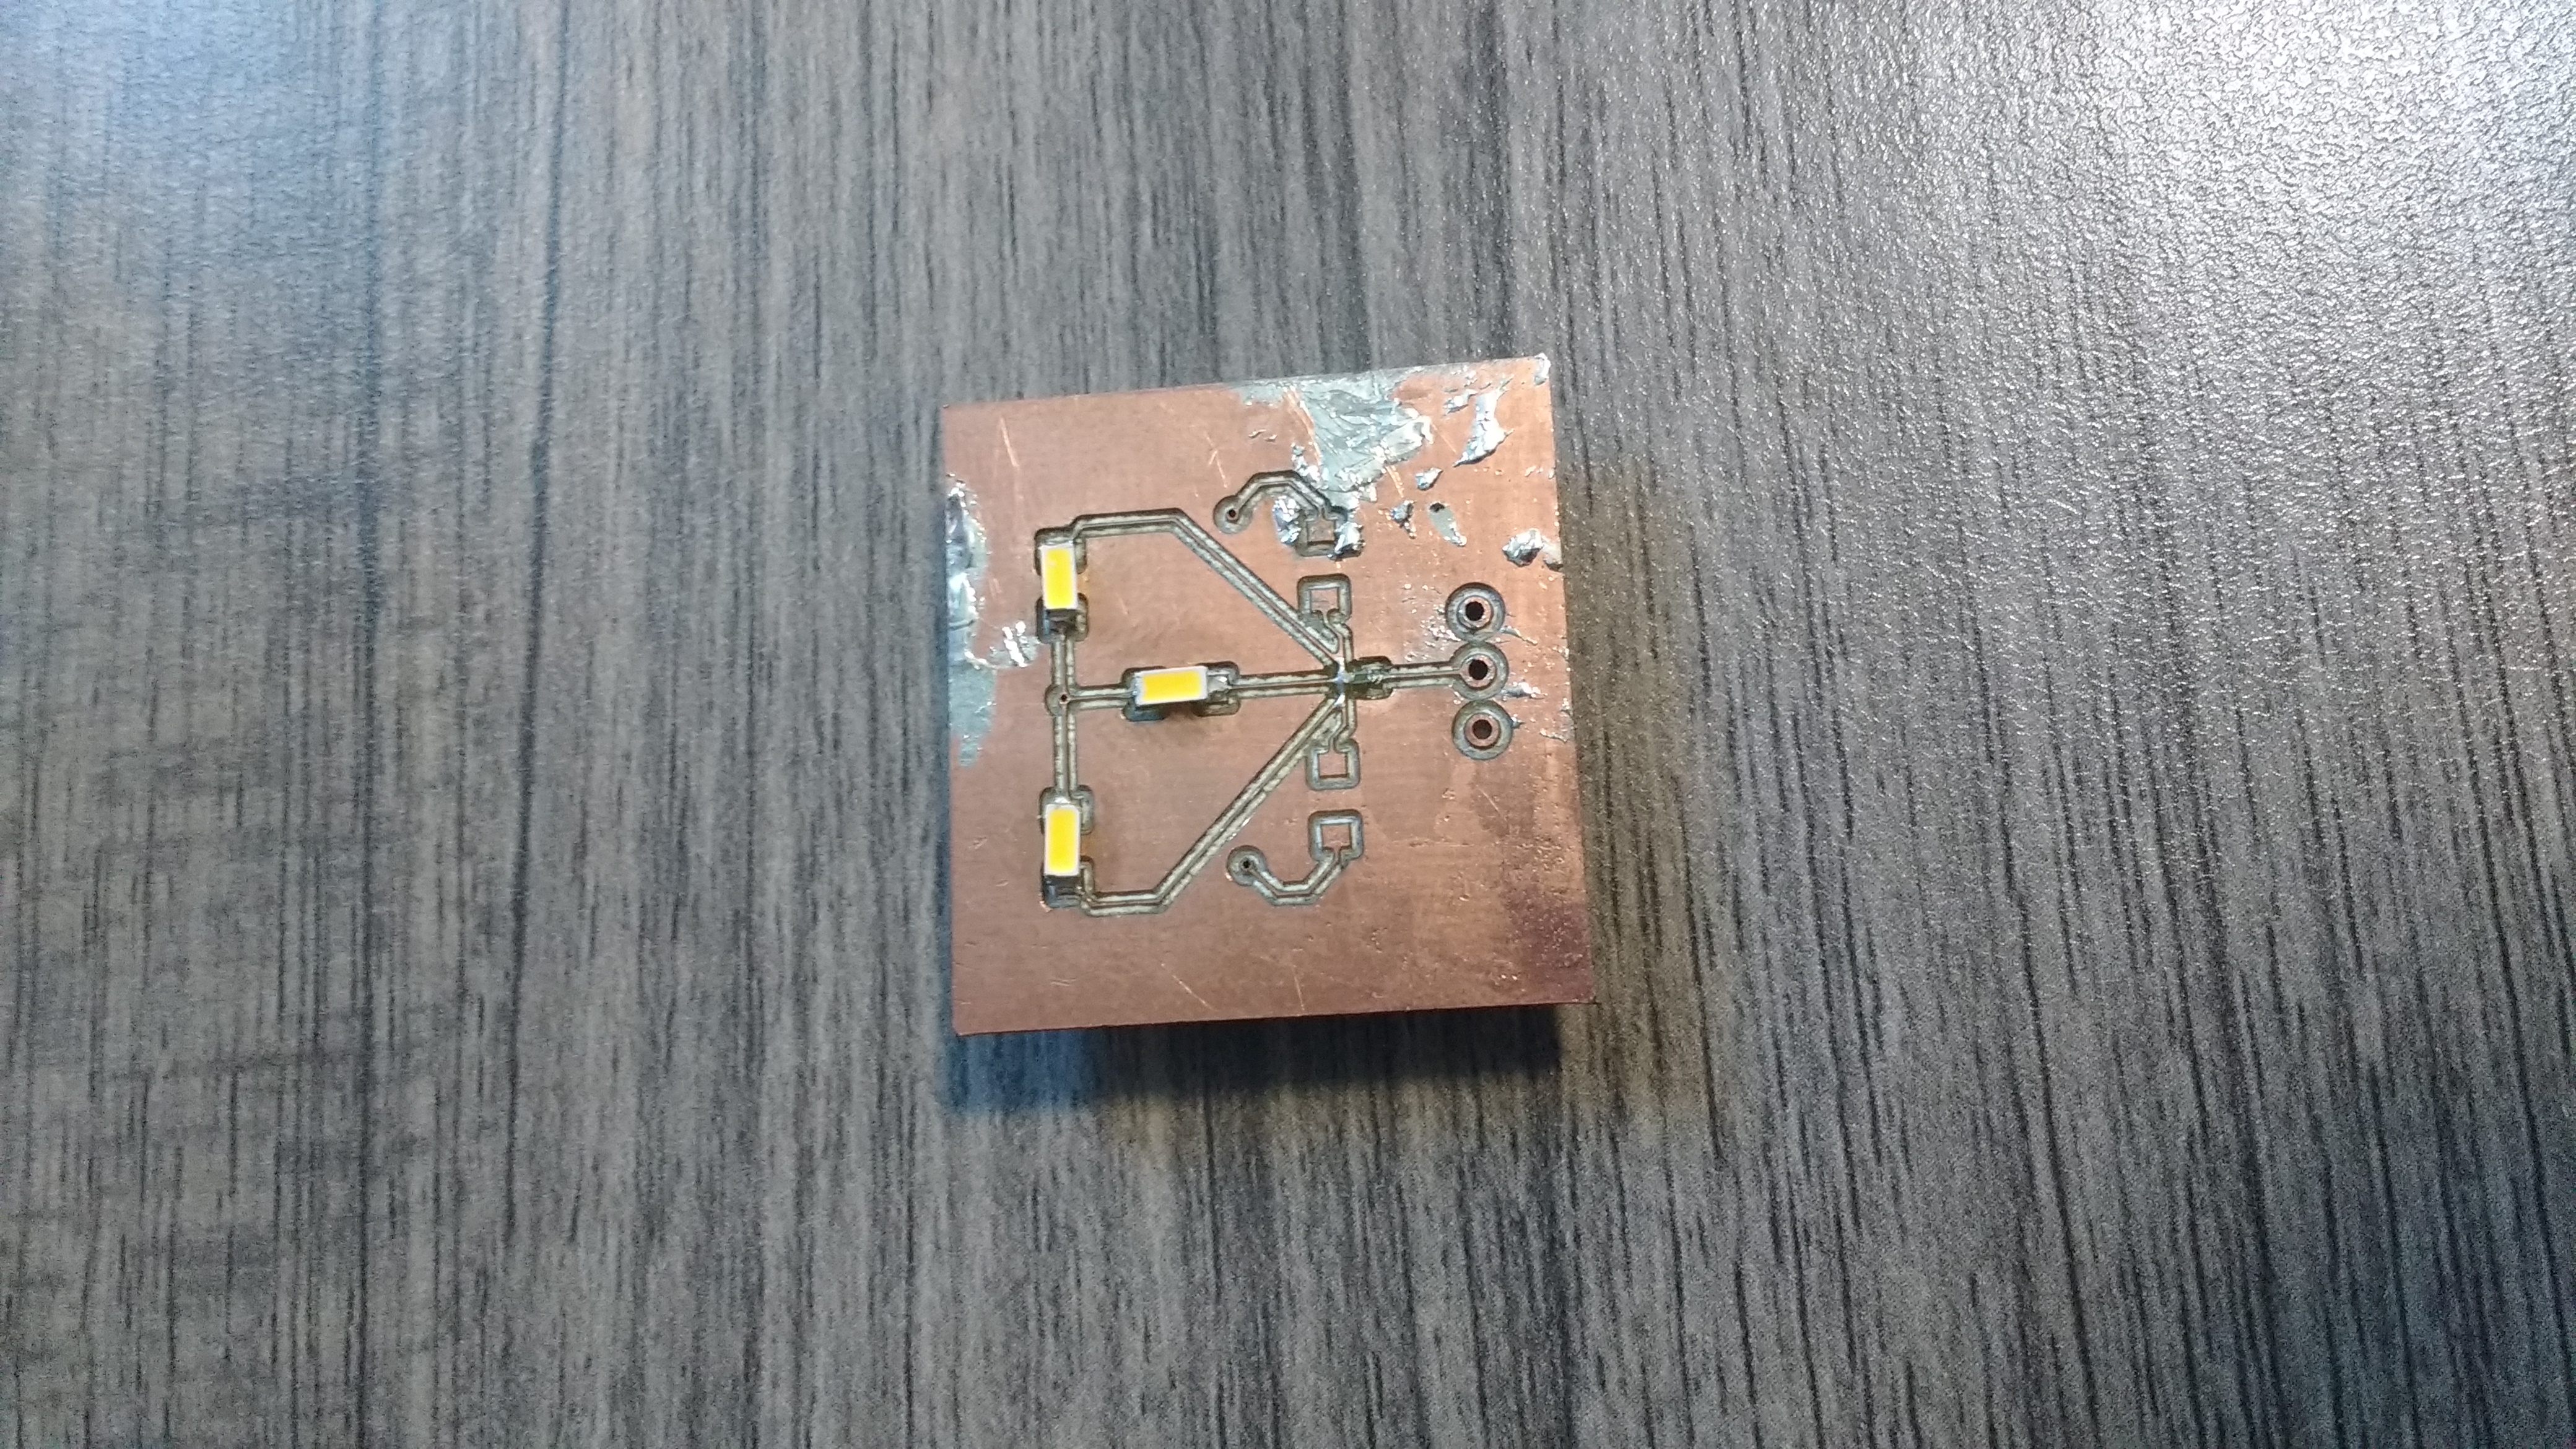 the top of a 1 inch by 1 inch copper PCB. It has resistors and leds soldered onto it